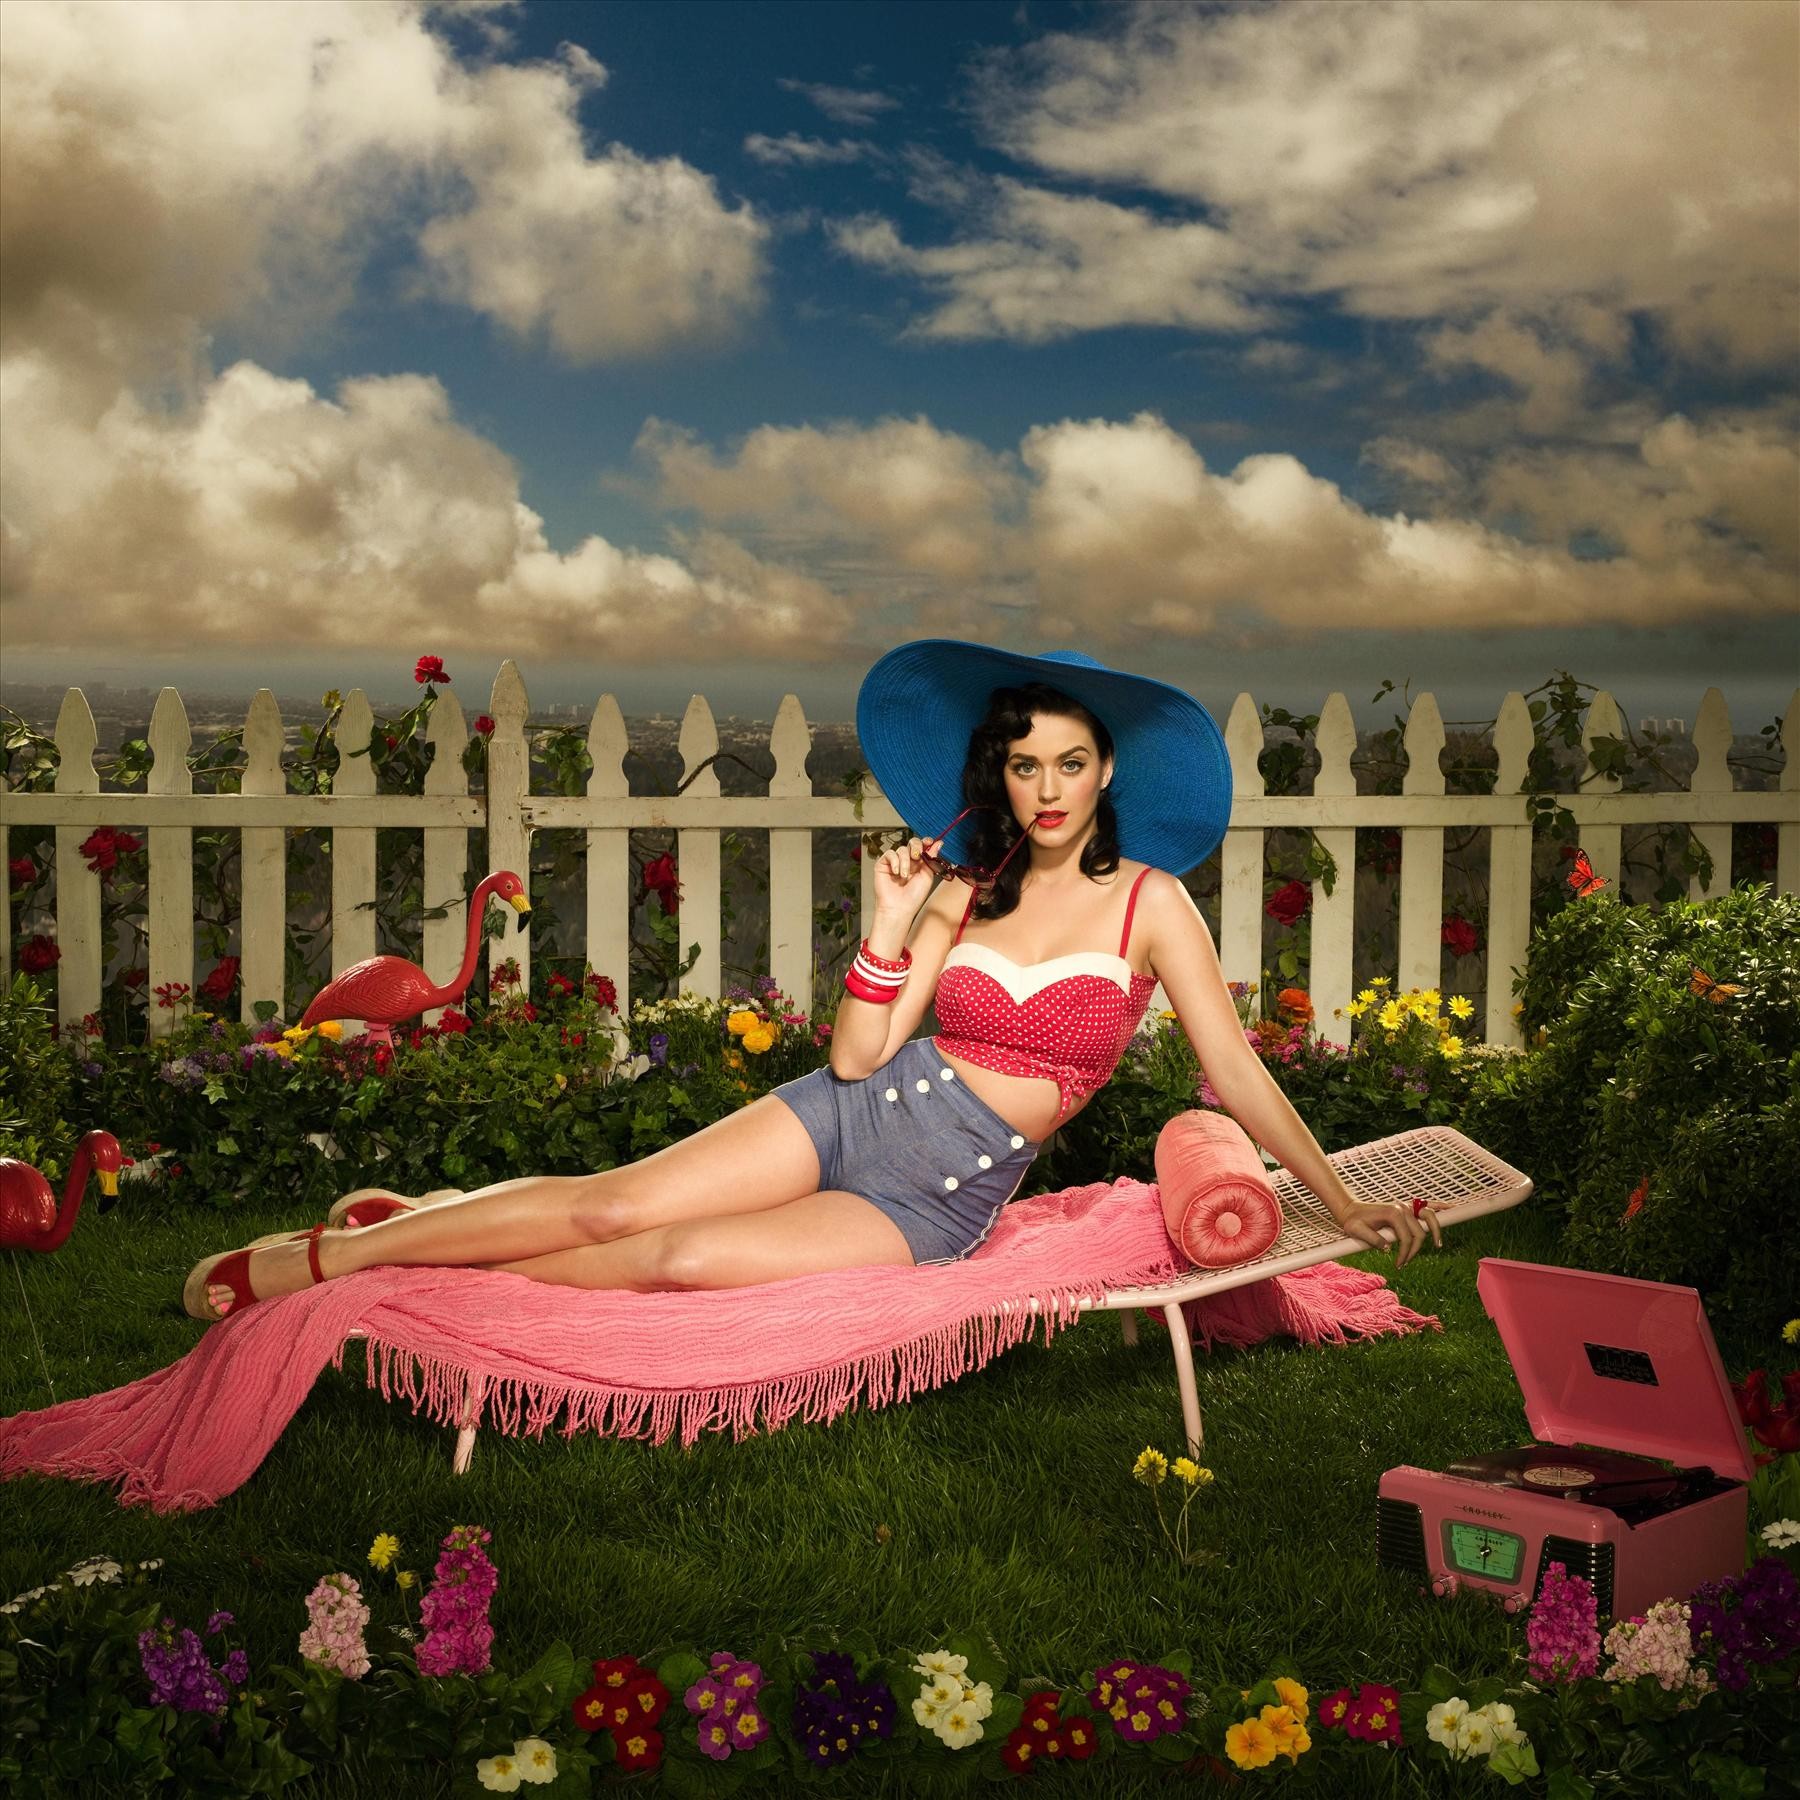 People 1800x1800 shorts poster singer hat garden lying on side legs women Katy Perry celebrity pants flowers grass sky clouds looking at viewer